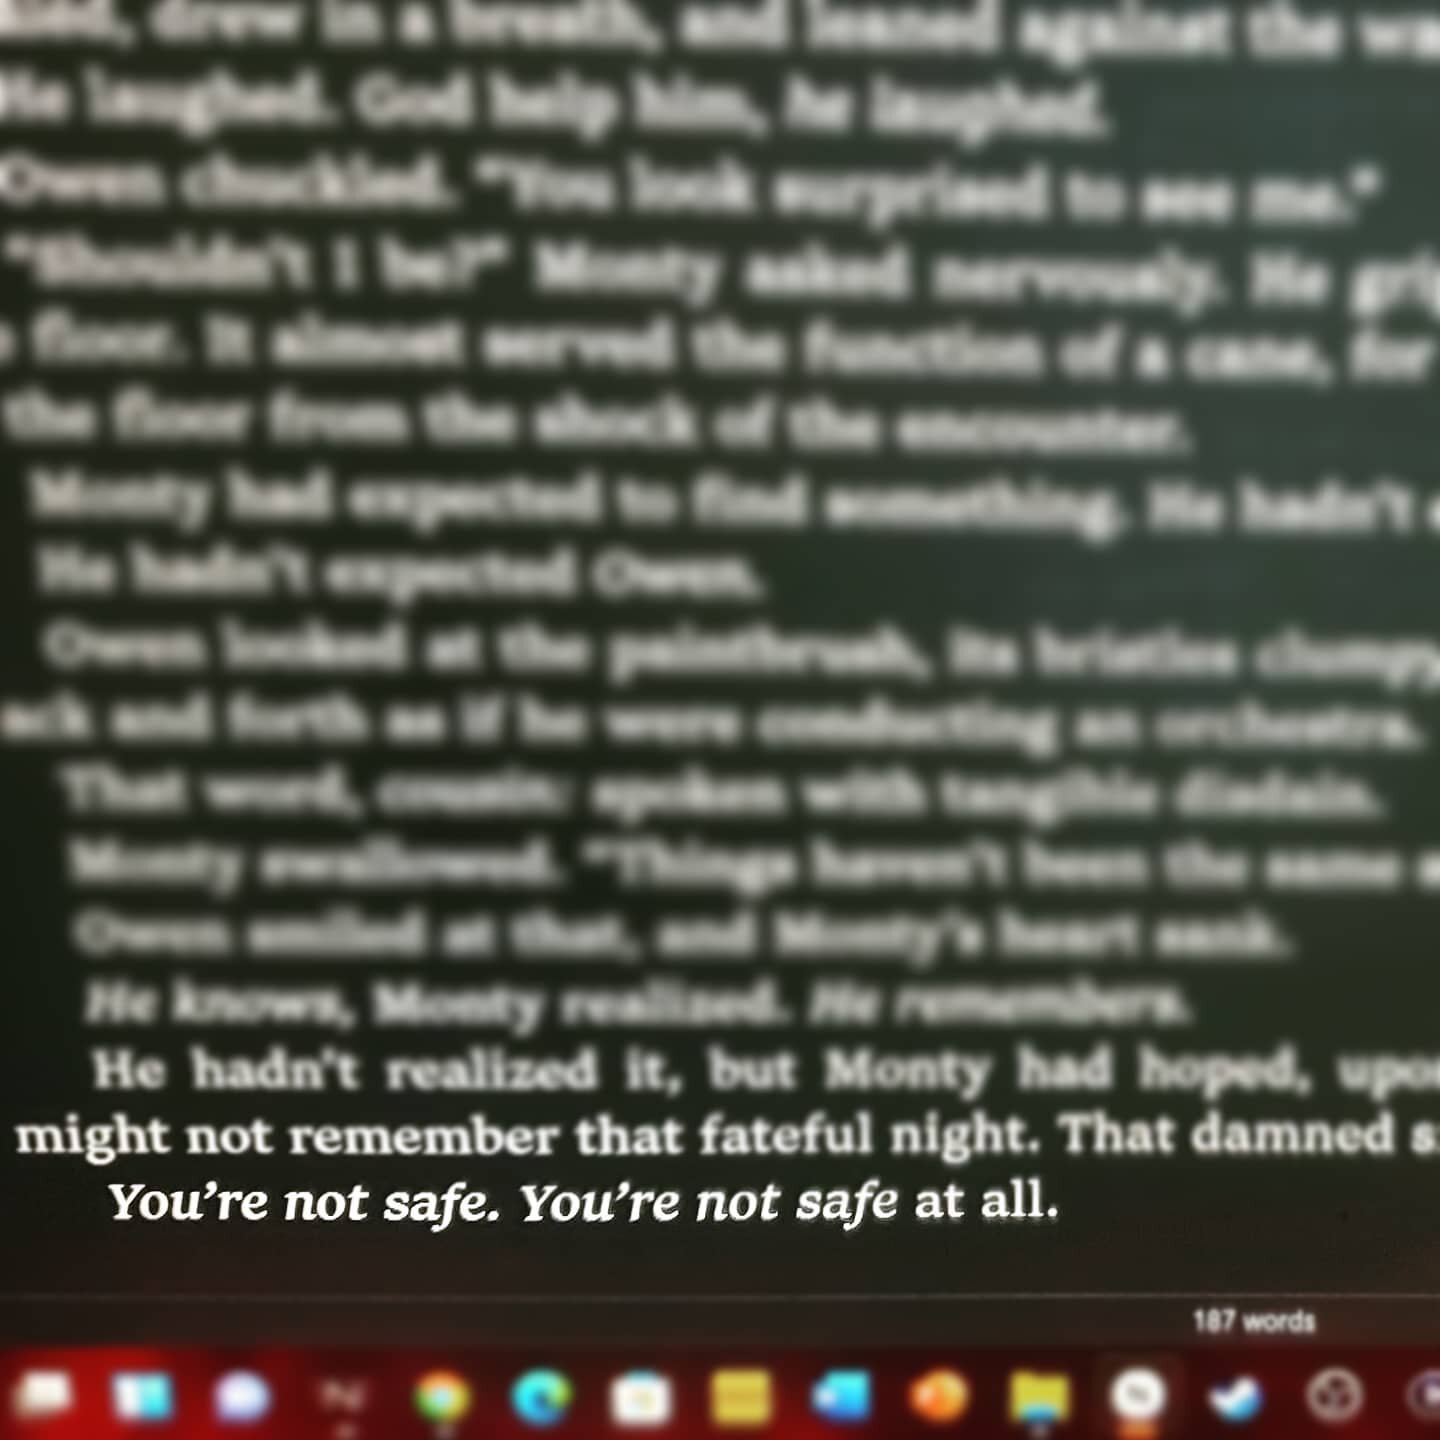 I sat down to write VERMILION, OR THE SANGUINE ARTS tonight, and the words just poured out of me. Ending tonight's session on this note is definitely dread-inspiring.

#horror #indieauthor #novella #horrorfantasy #authorsofinstagram #authorsofig